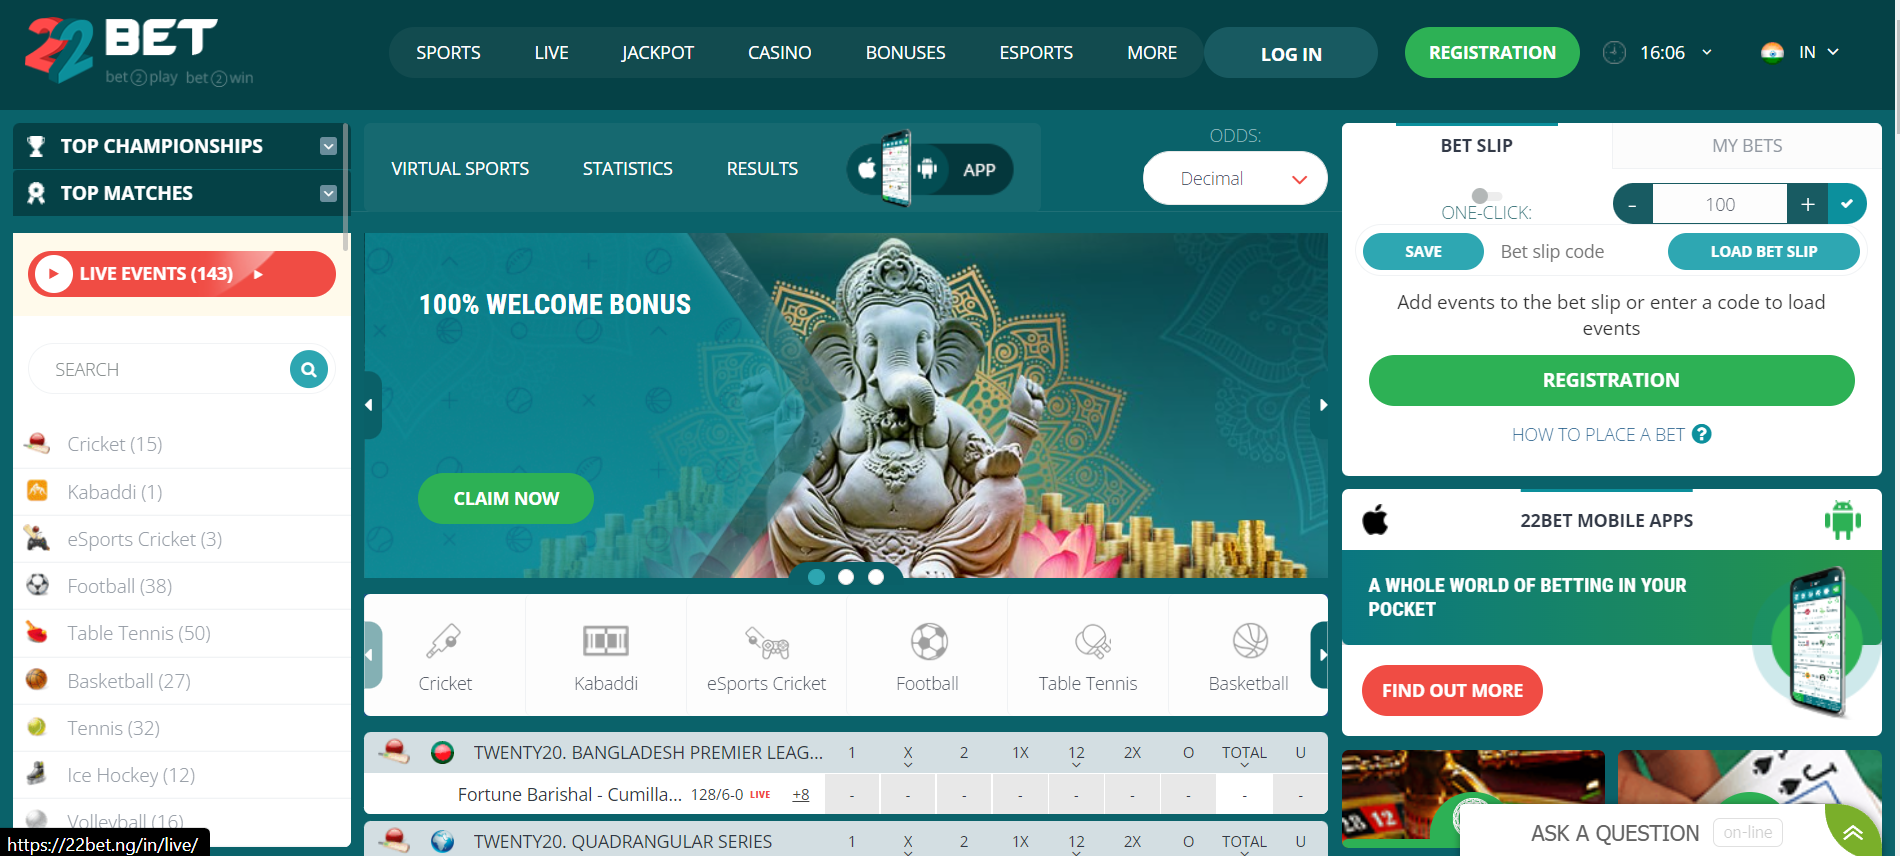 website home page of 22bet Nigeria offering login, betting and several other options at once.